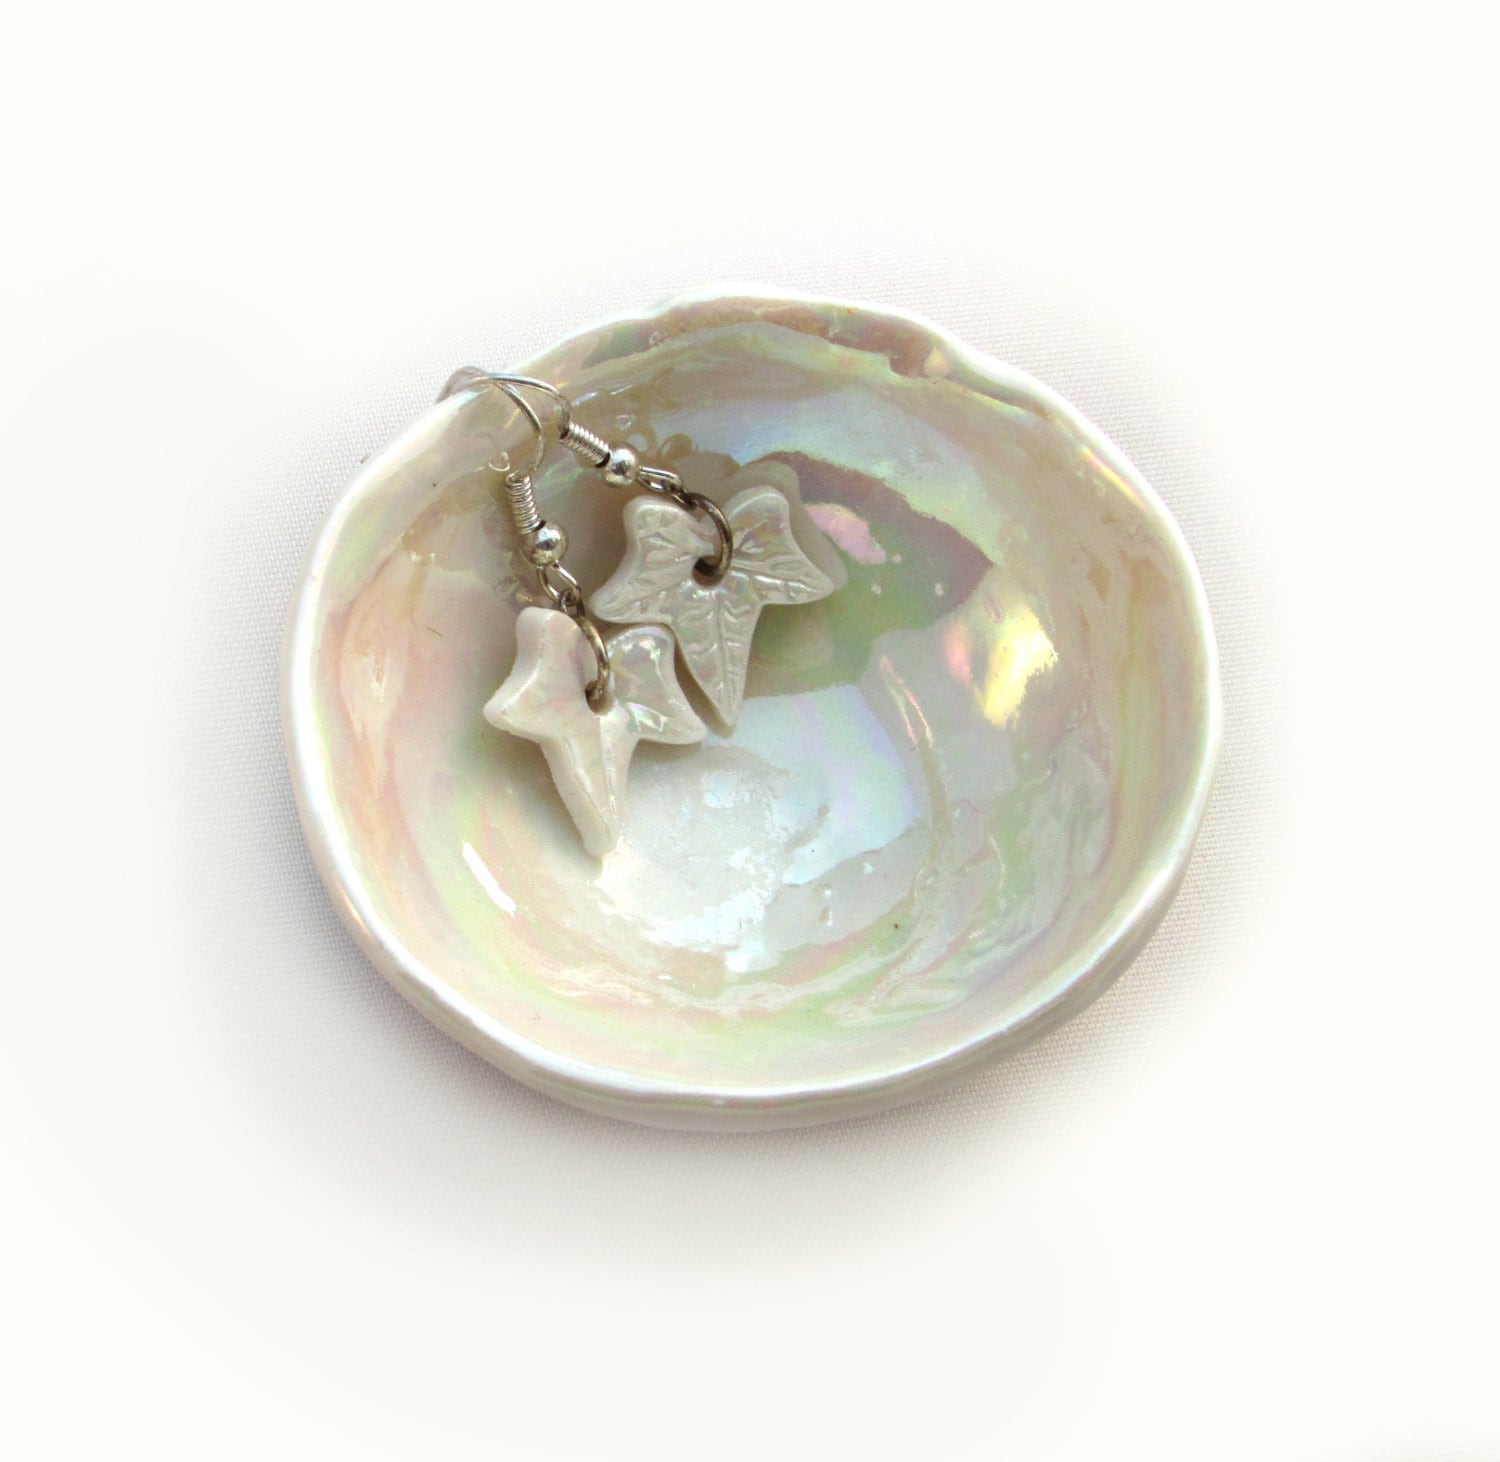 Porcelain Anniversary Gifts
 Porcelain Small Bowl Pearl Wedding Anniversary Gift